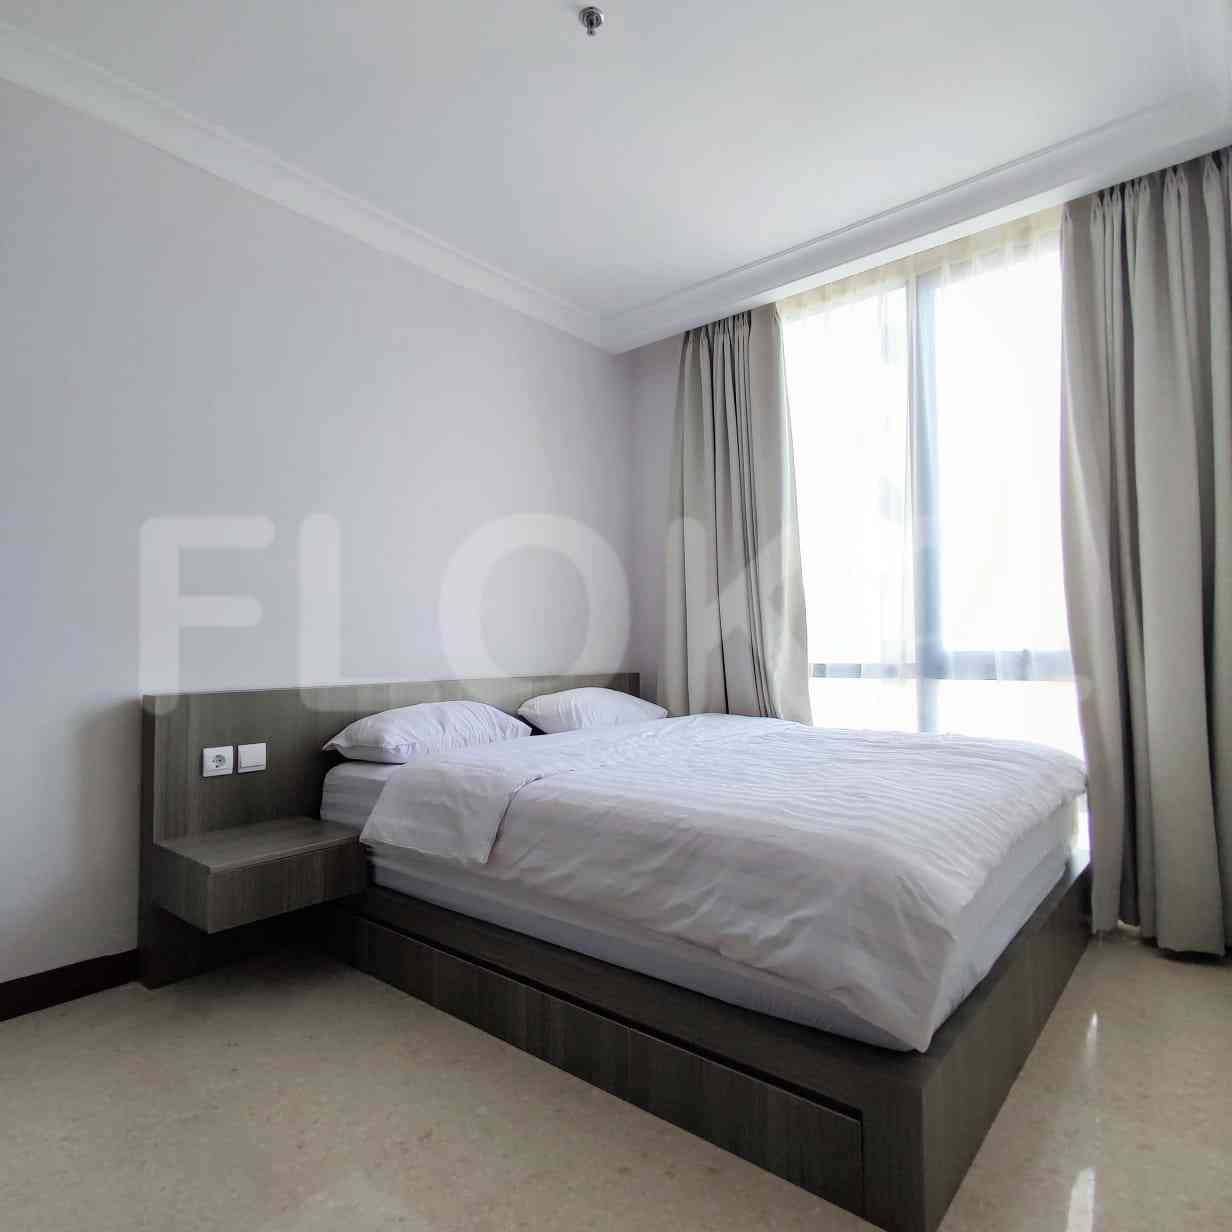 3 Bedroom on 30th Floor for Rent in Permata Hijau Suites Apartment - fpebba 4